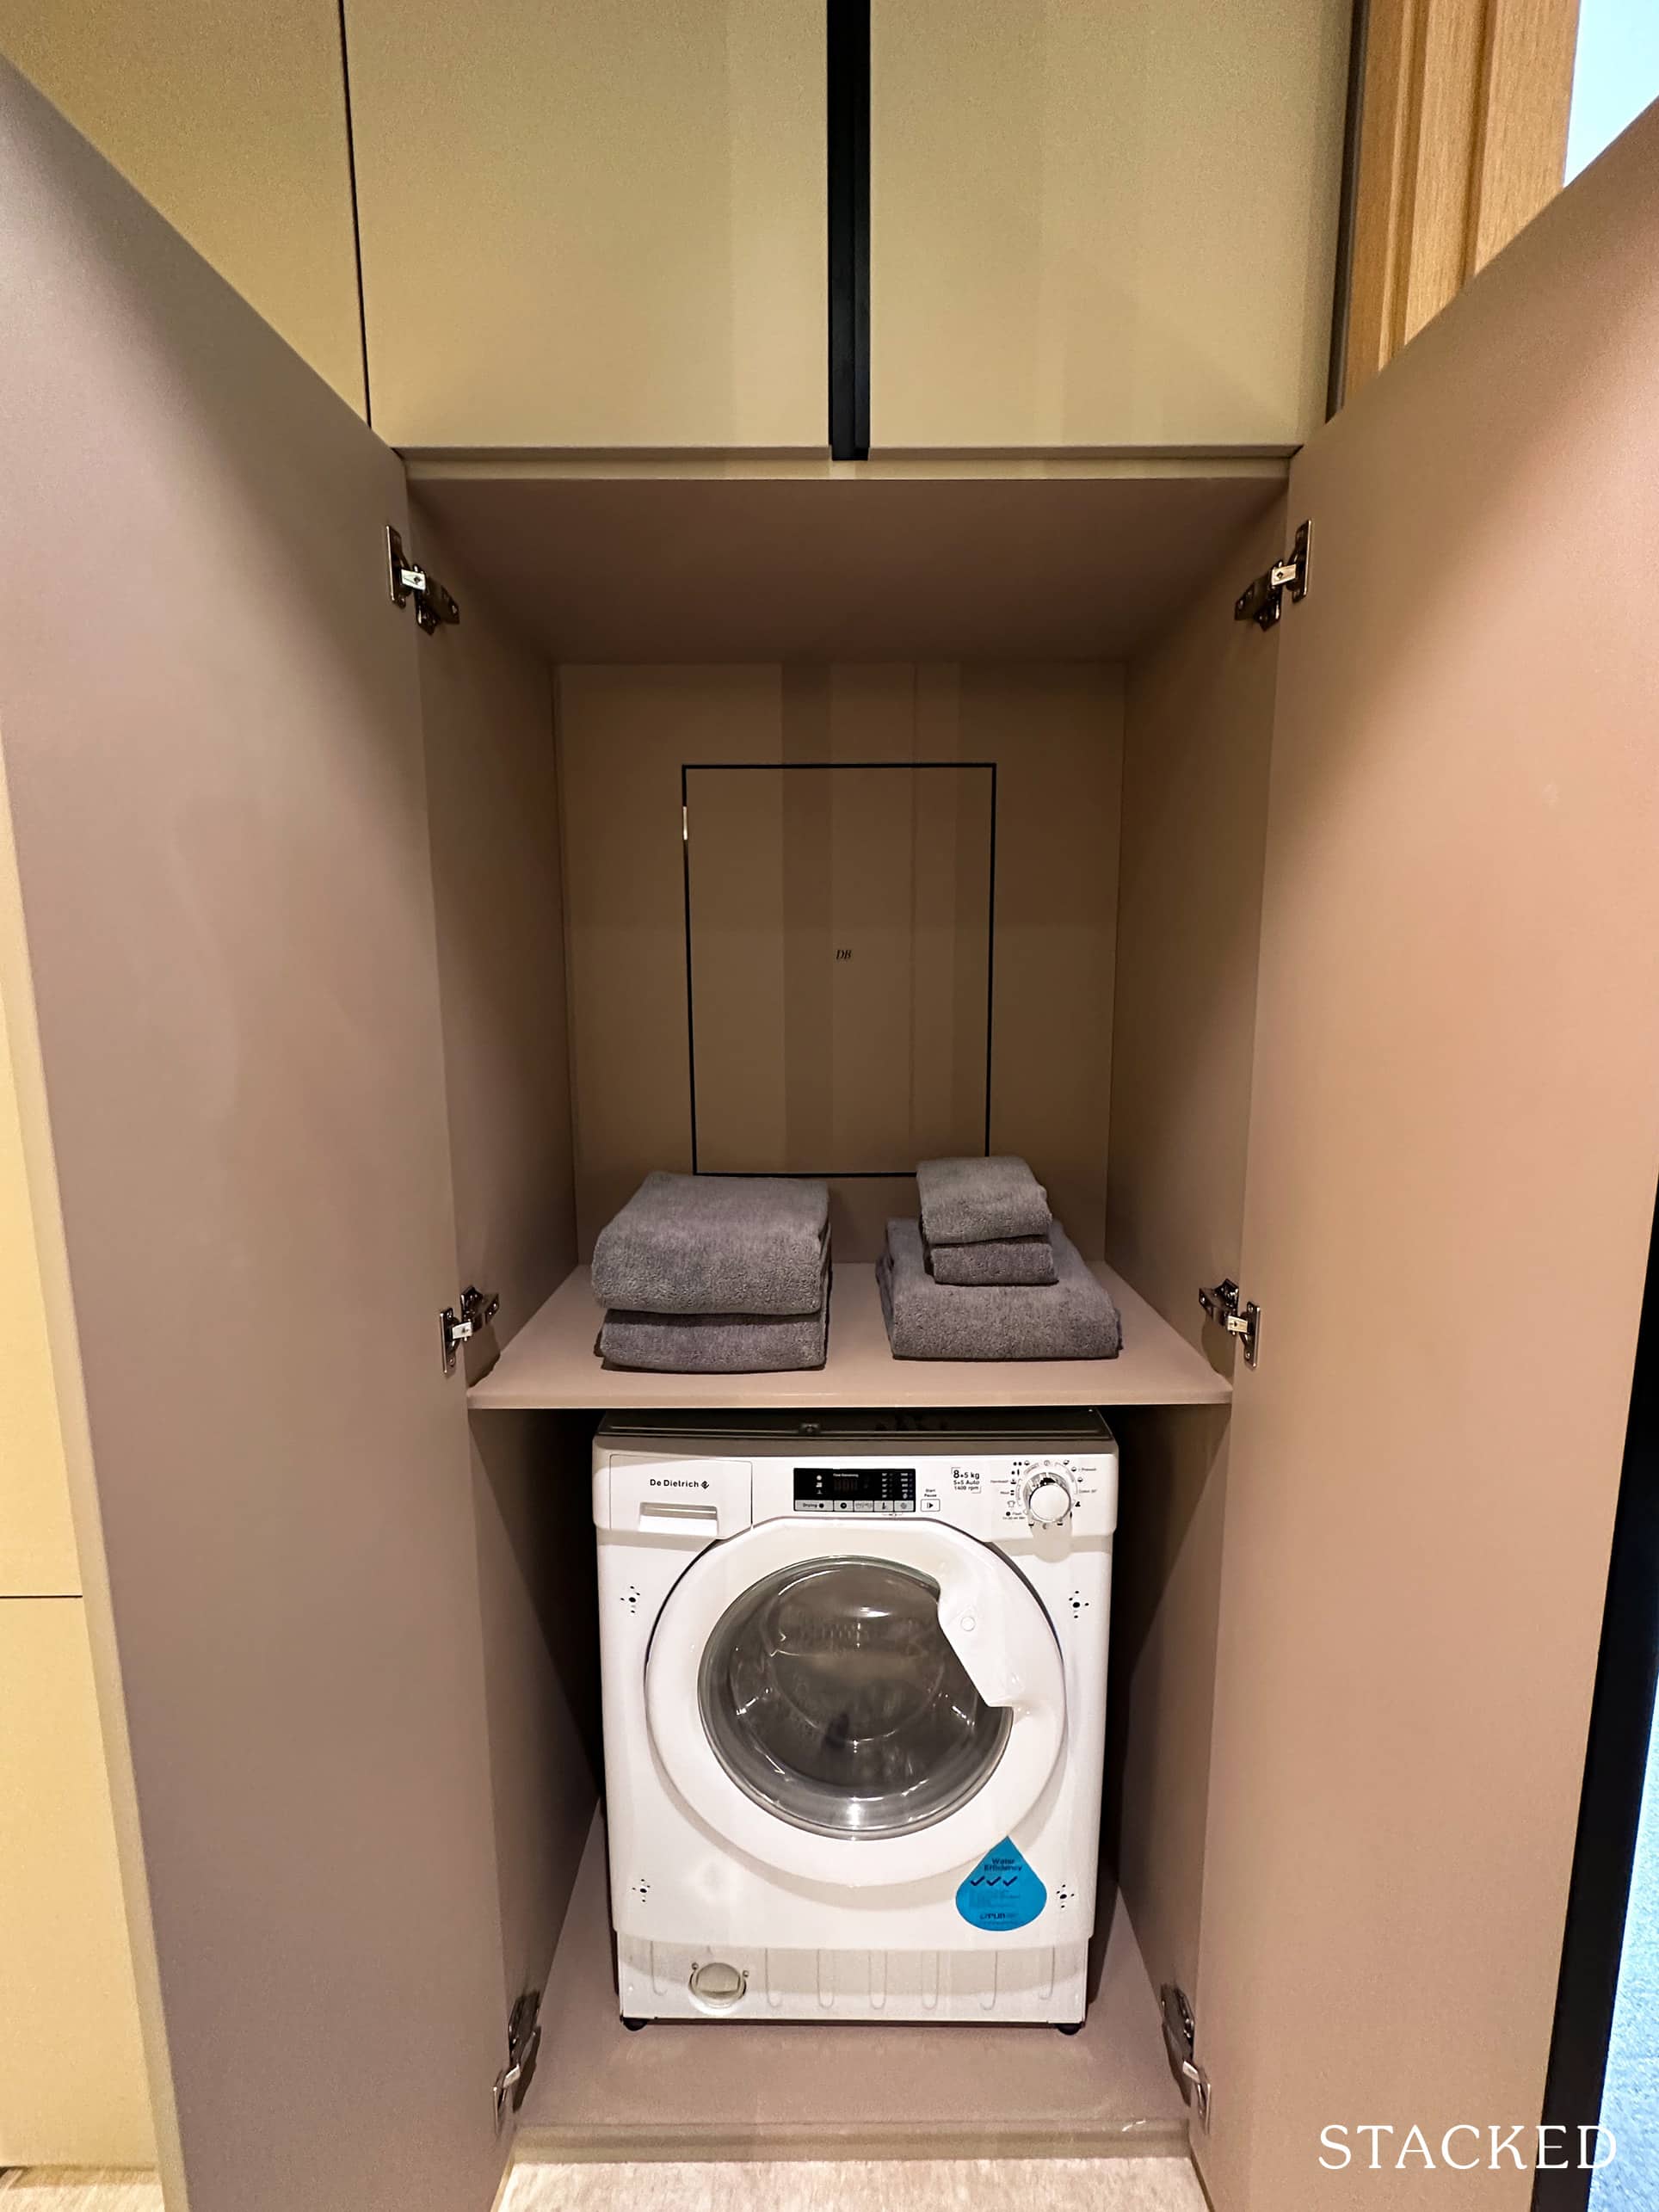 Hill House 2 Bedroom Type B3 Washer Dryer